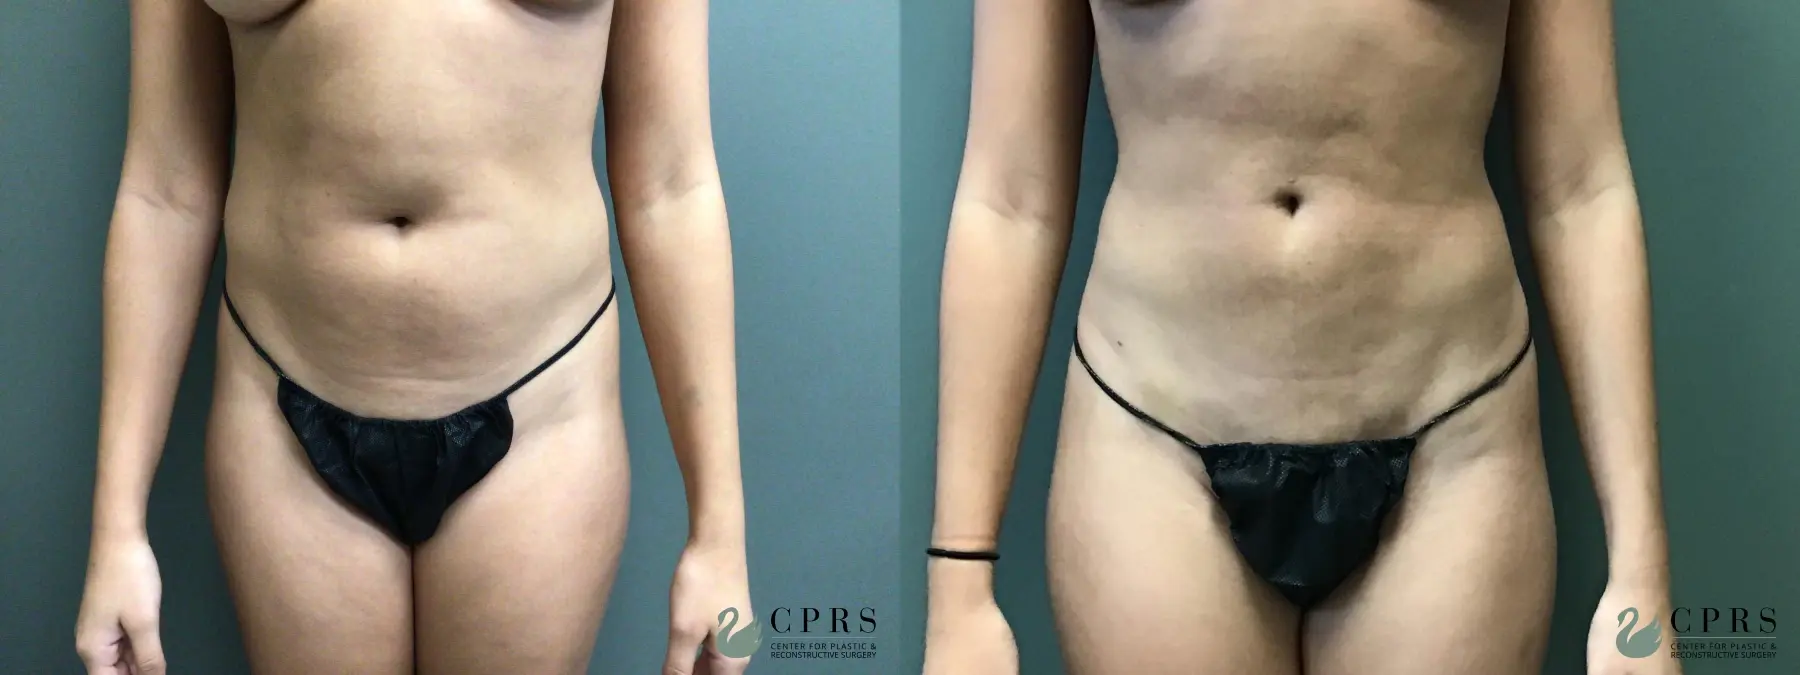 Liposuction: Patient 1 - Before and After  